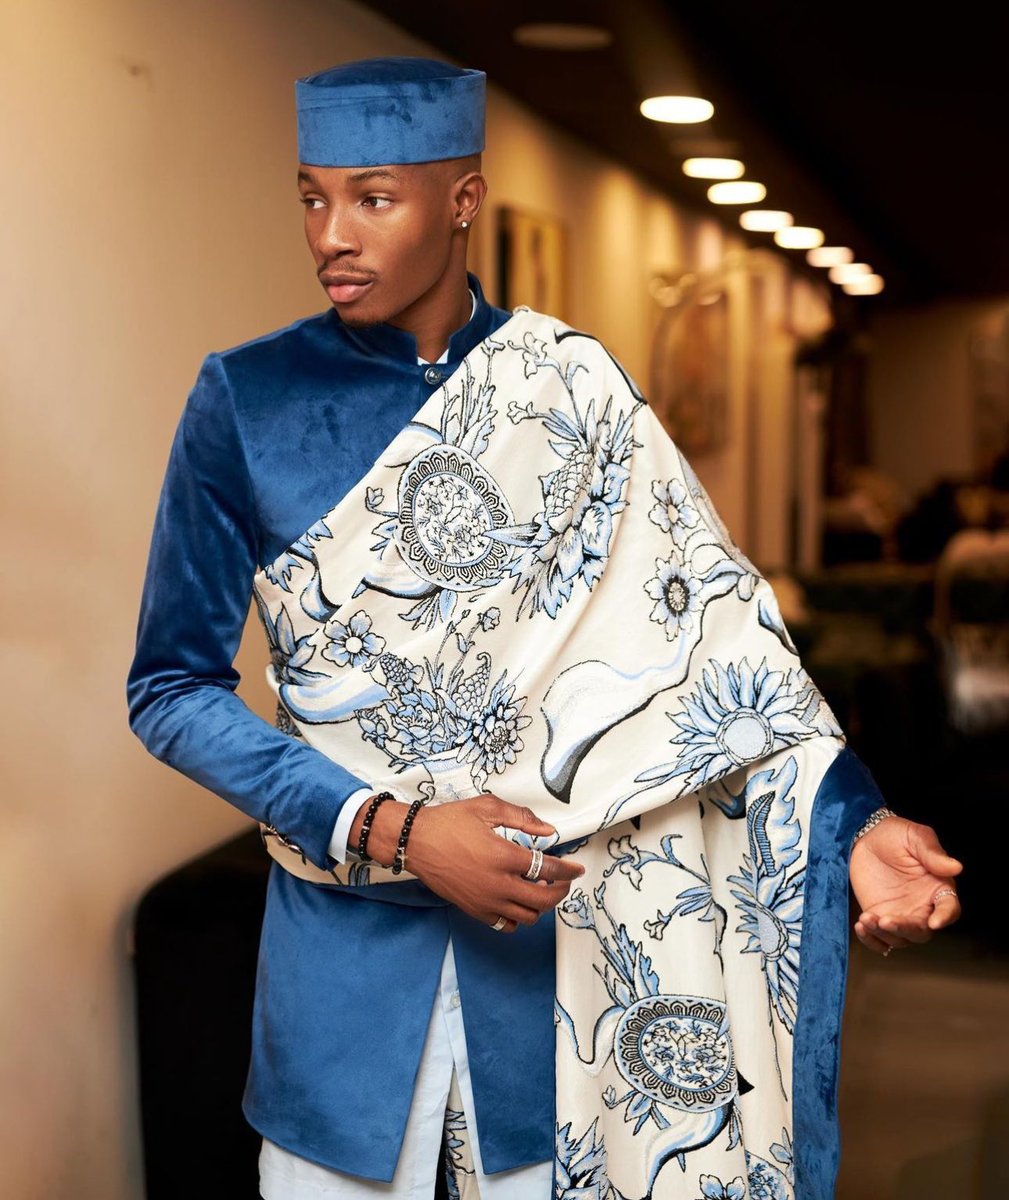 Will Kanaga jnr return before AMVCA?

He should come o, I want to see what he will wear this year.

#Kanagajnr